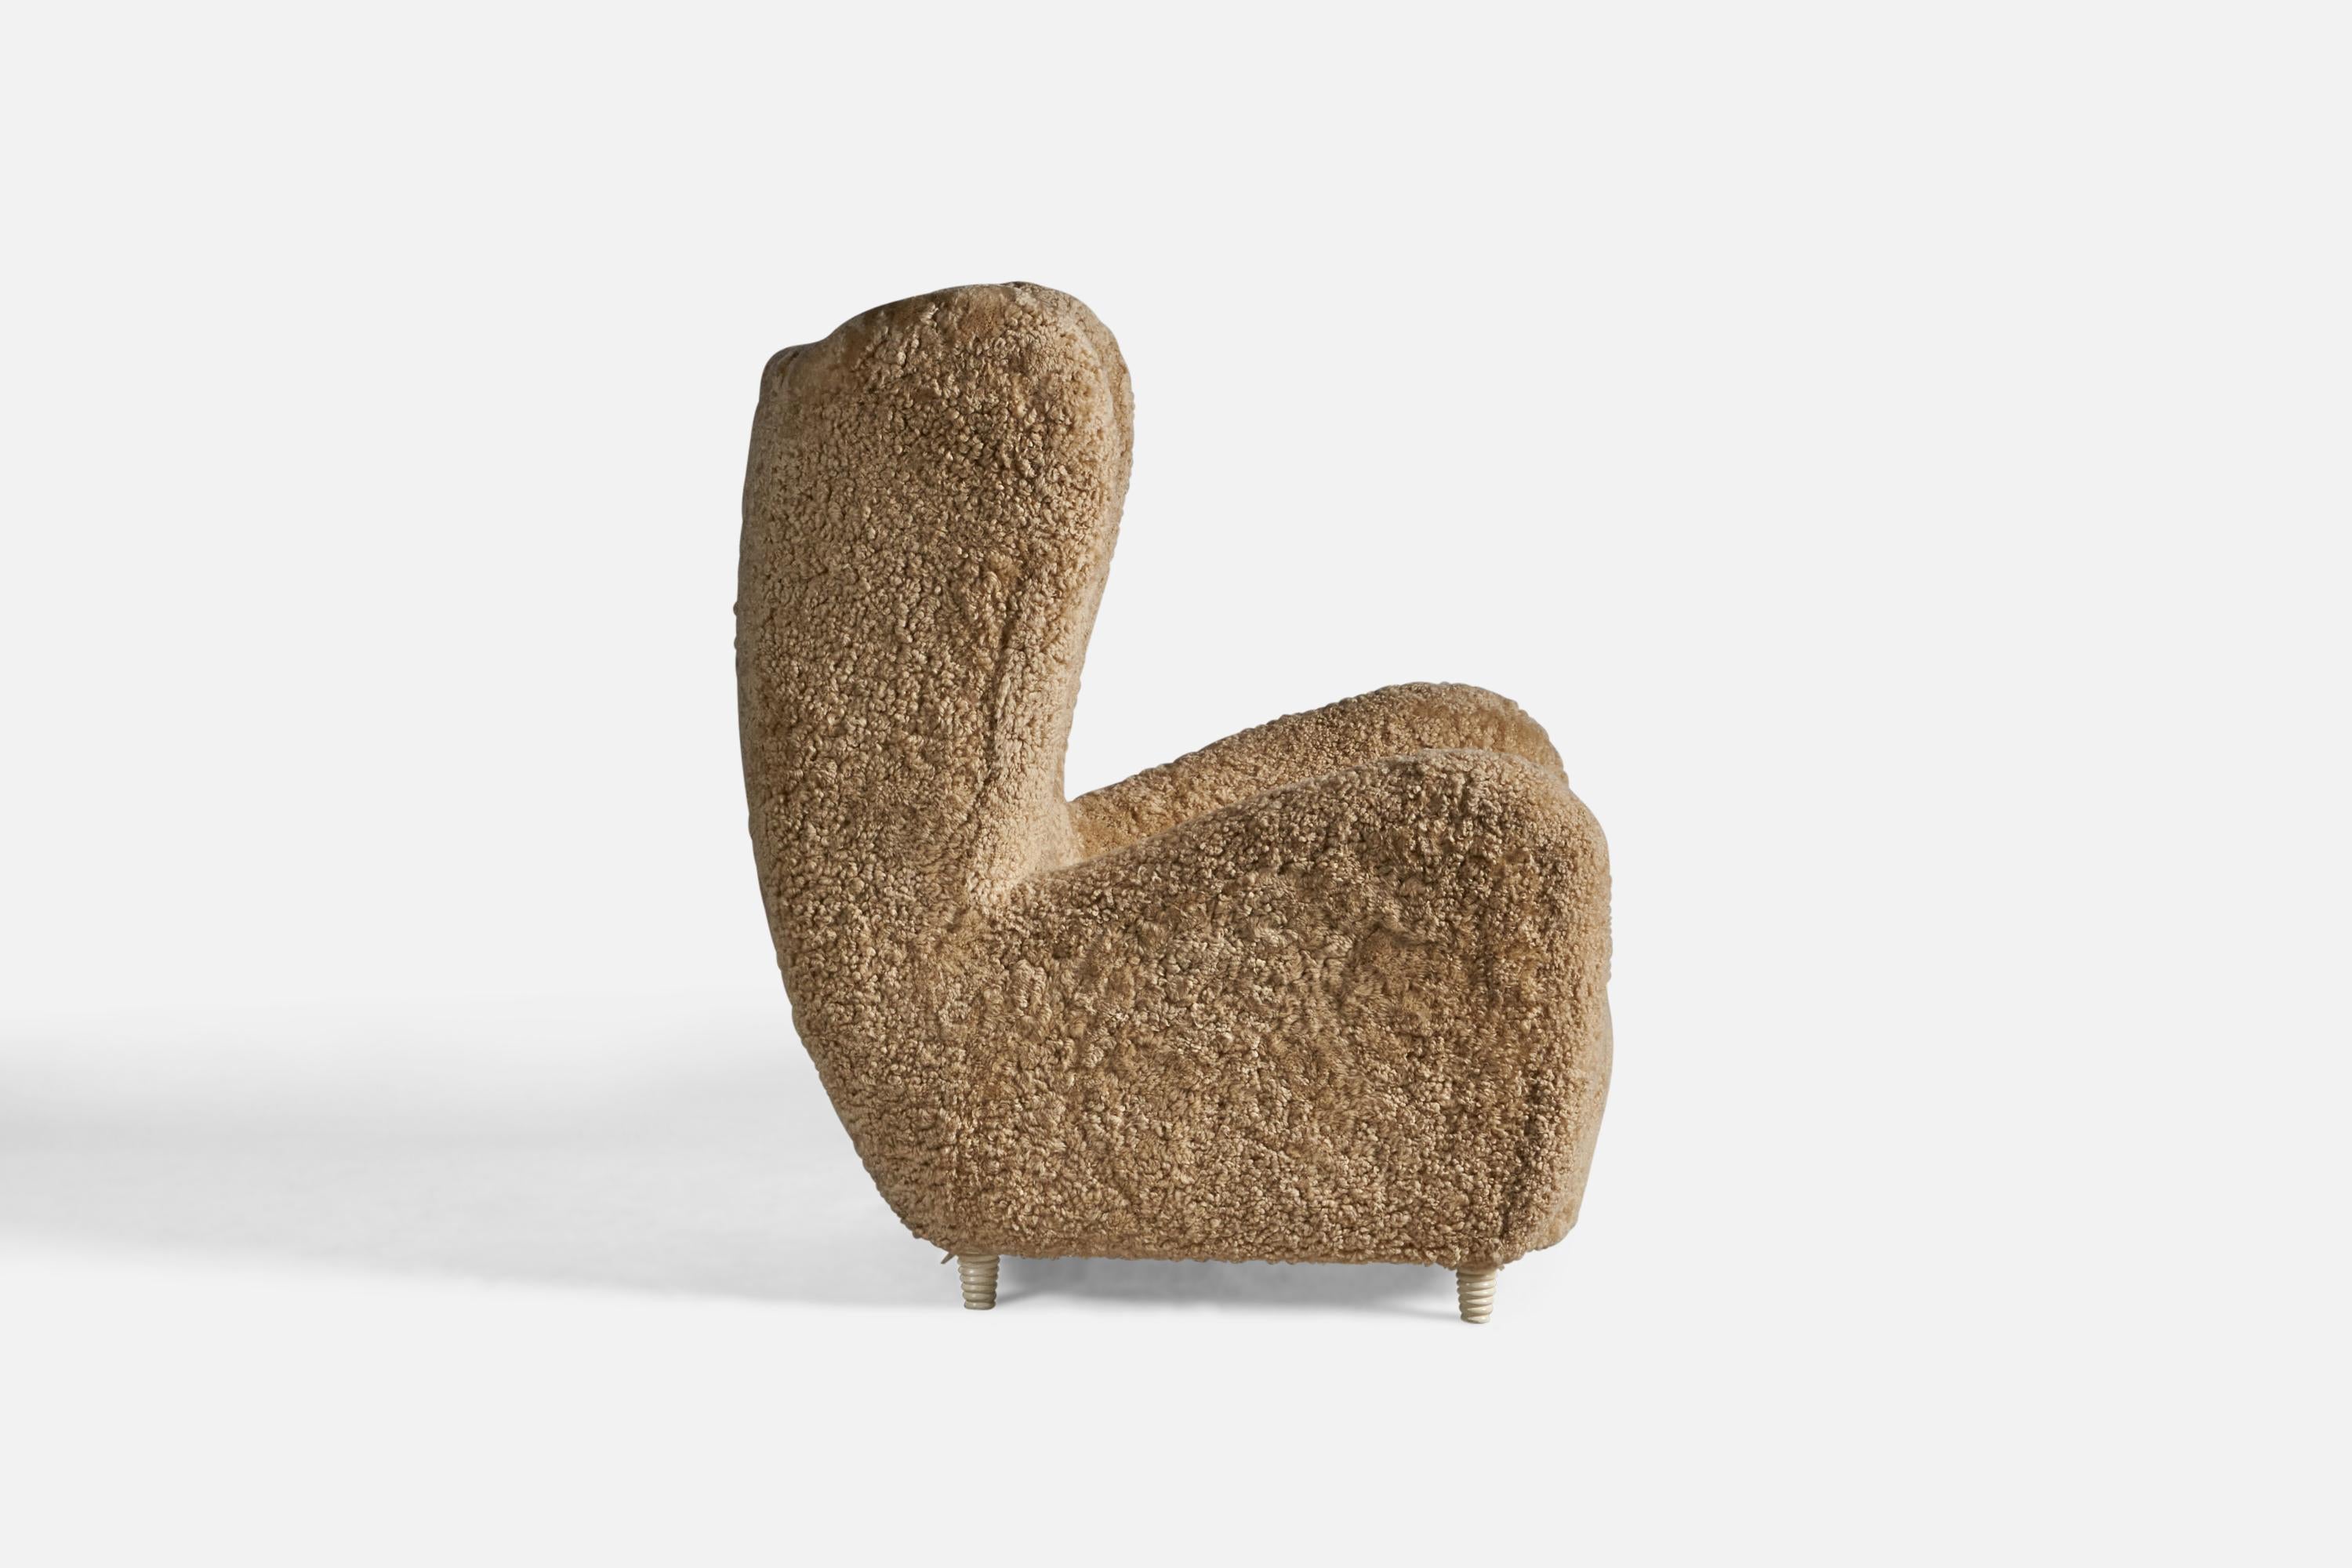 Italian Emilio Sarrachi, Sizeable Lounge Chairs, Shearling, Wood, Italy, 1940s For Sale